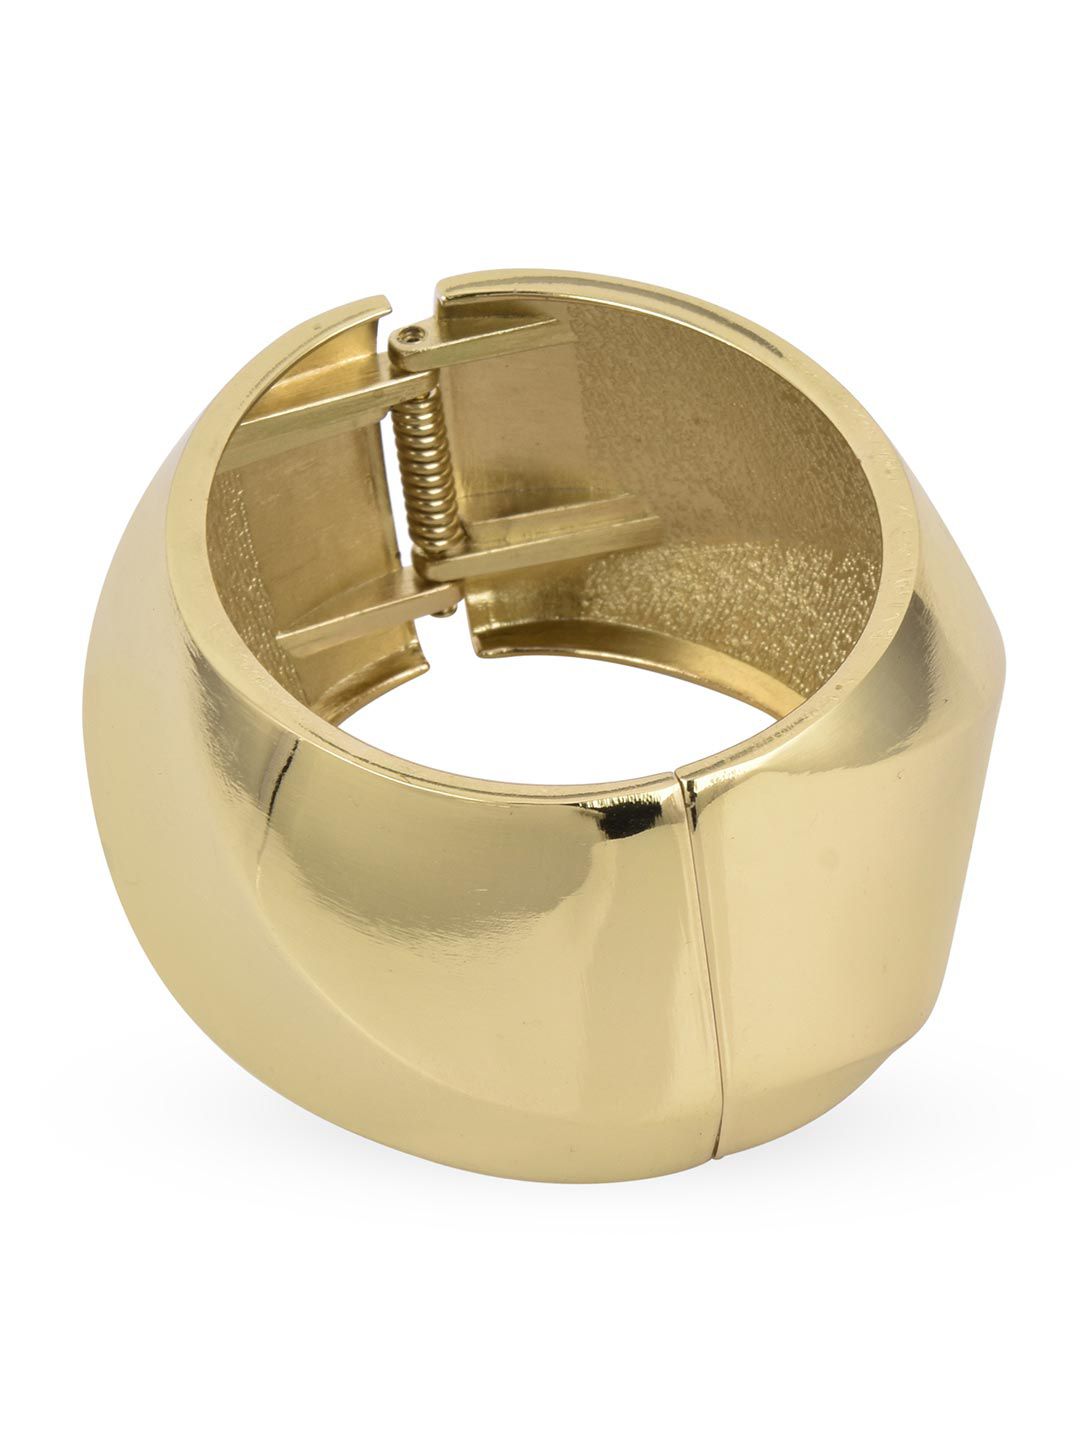 Tistabene Women Gold-Toned Gold-Plated Cuff Bracelet Price in India